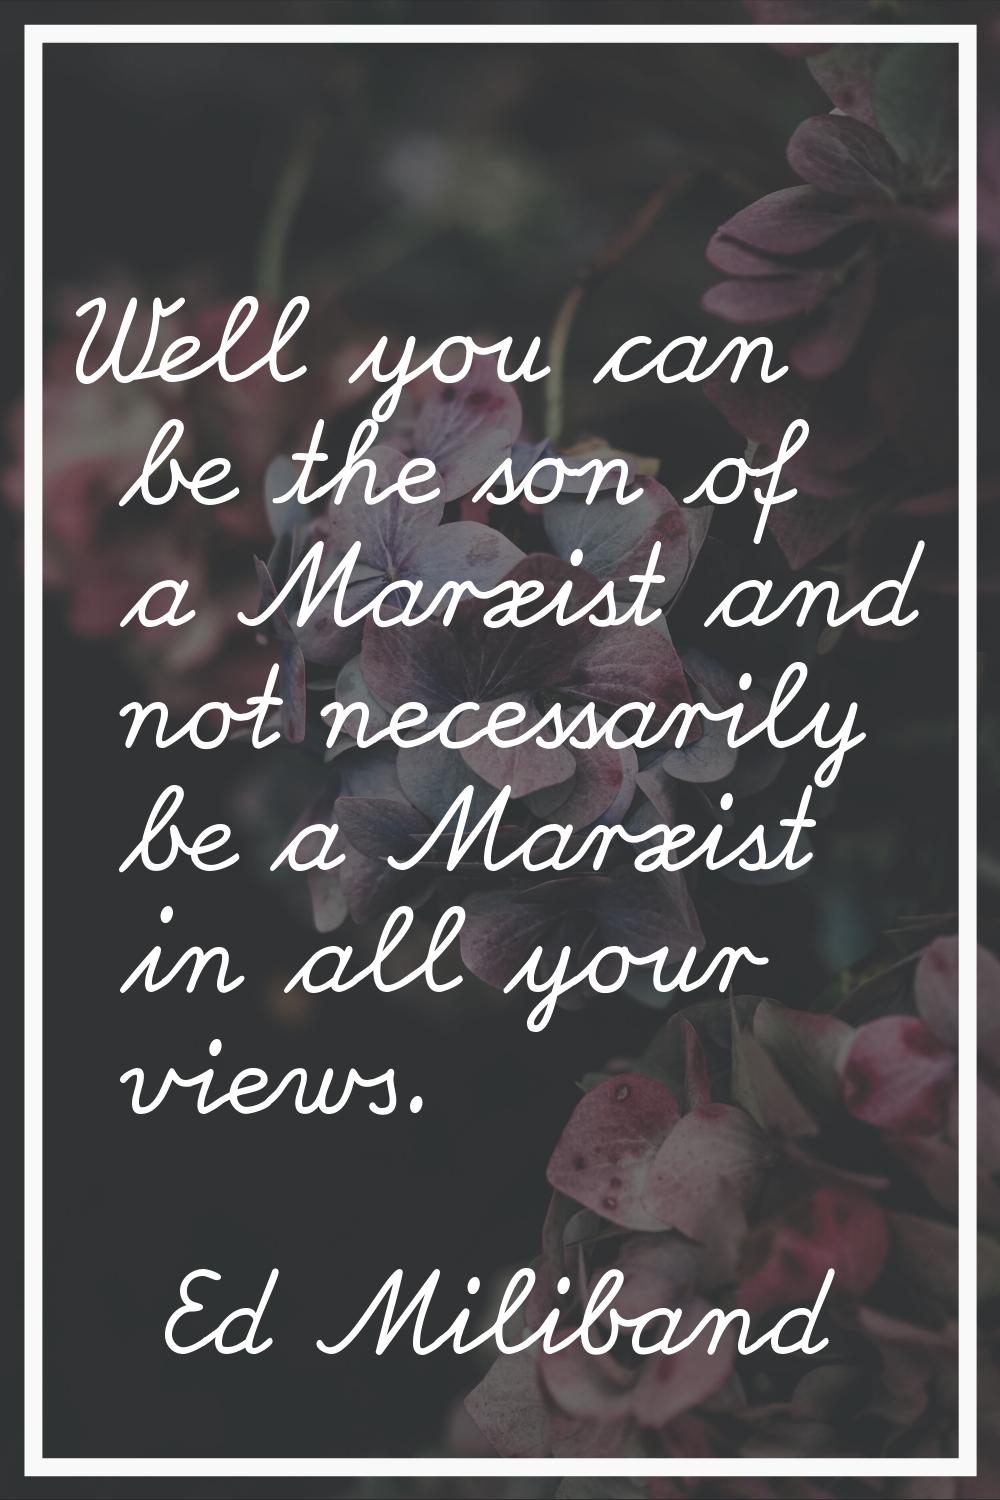 Well you can be the son of a Marxist and not necessarily be a Marxist in all your views.